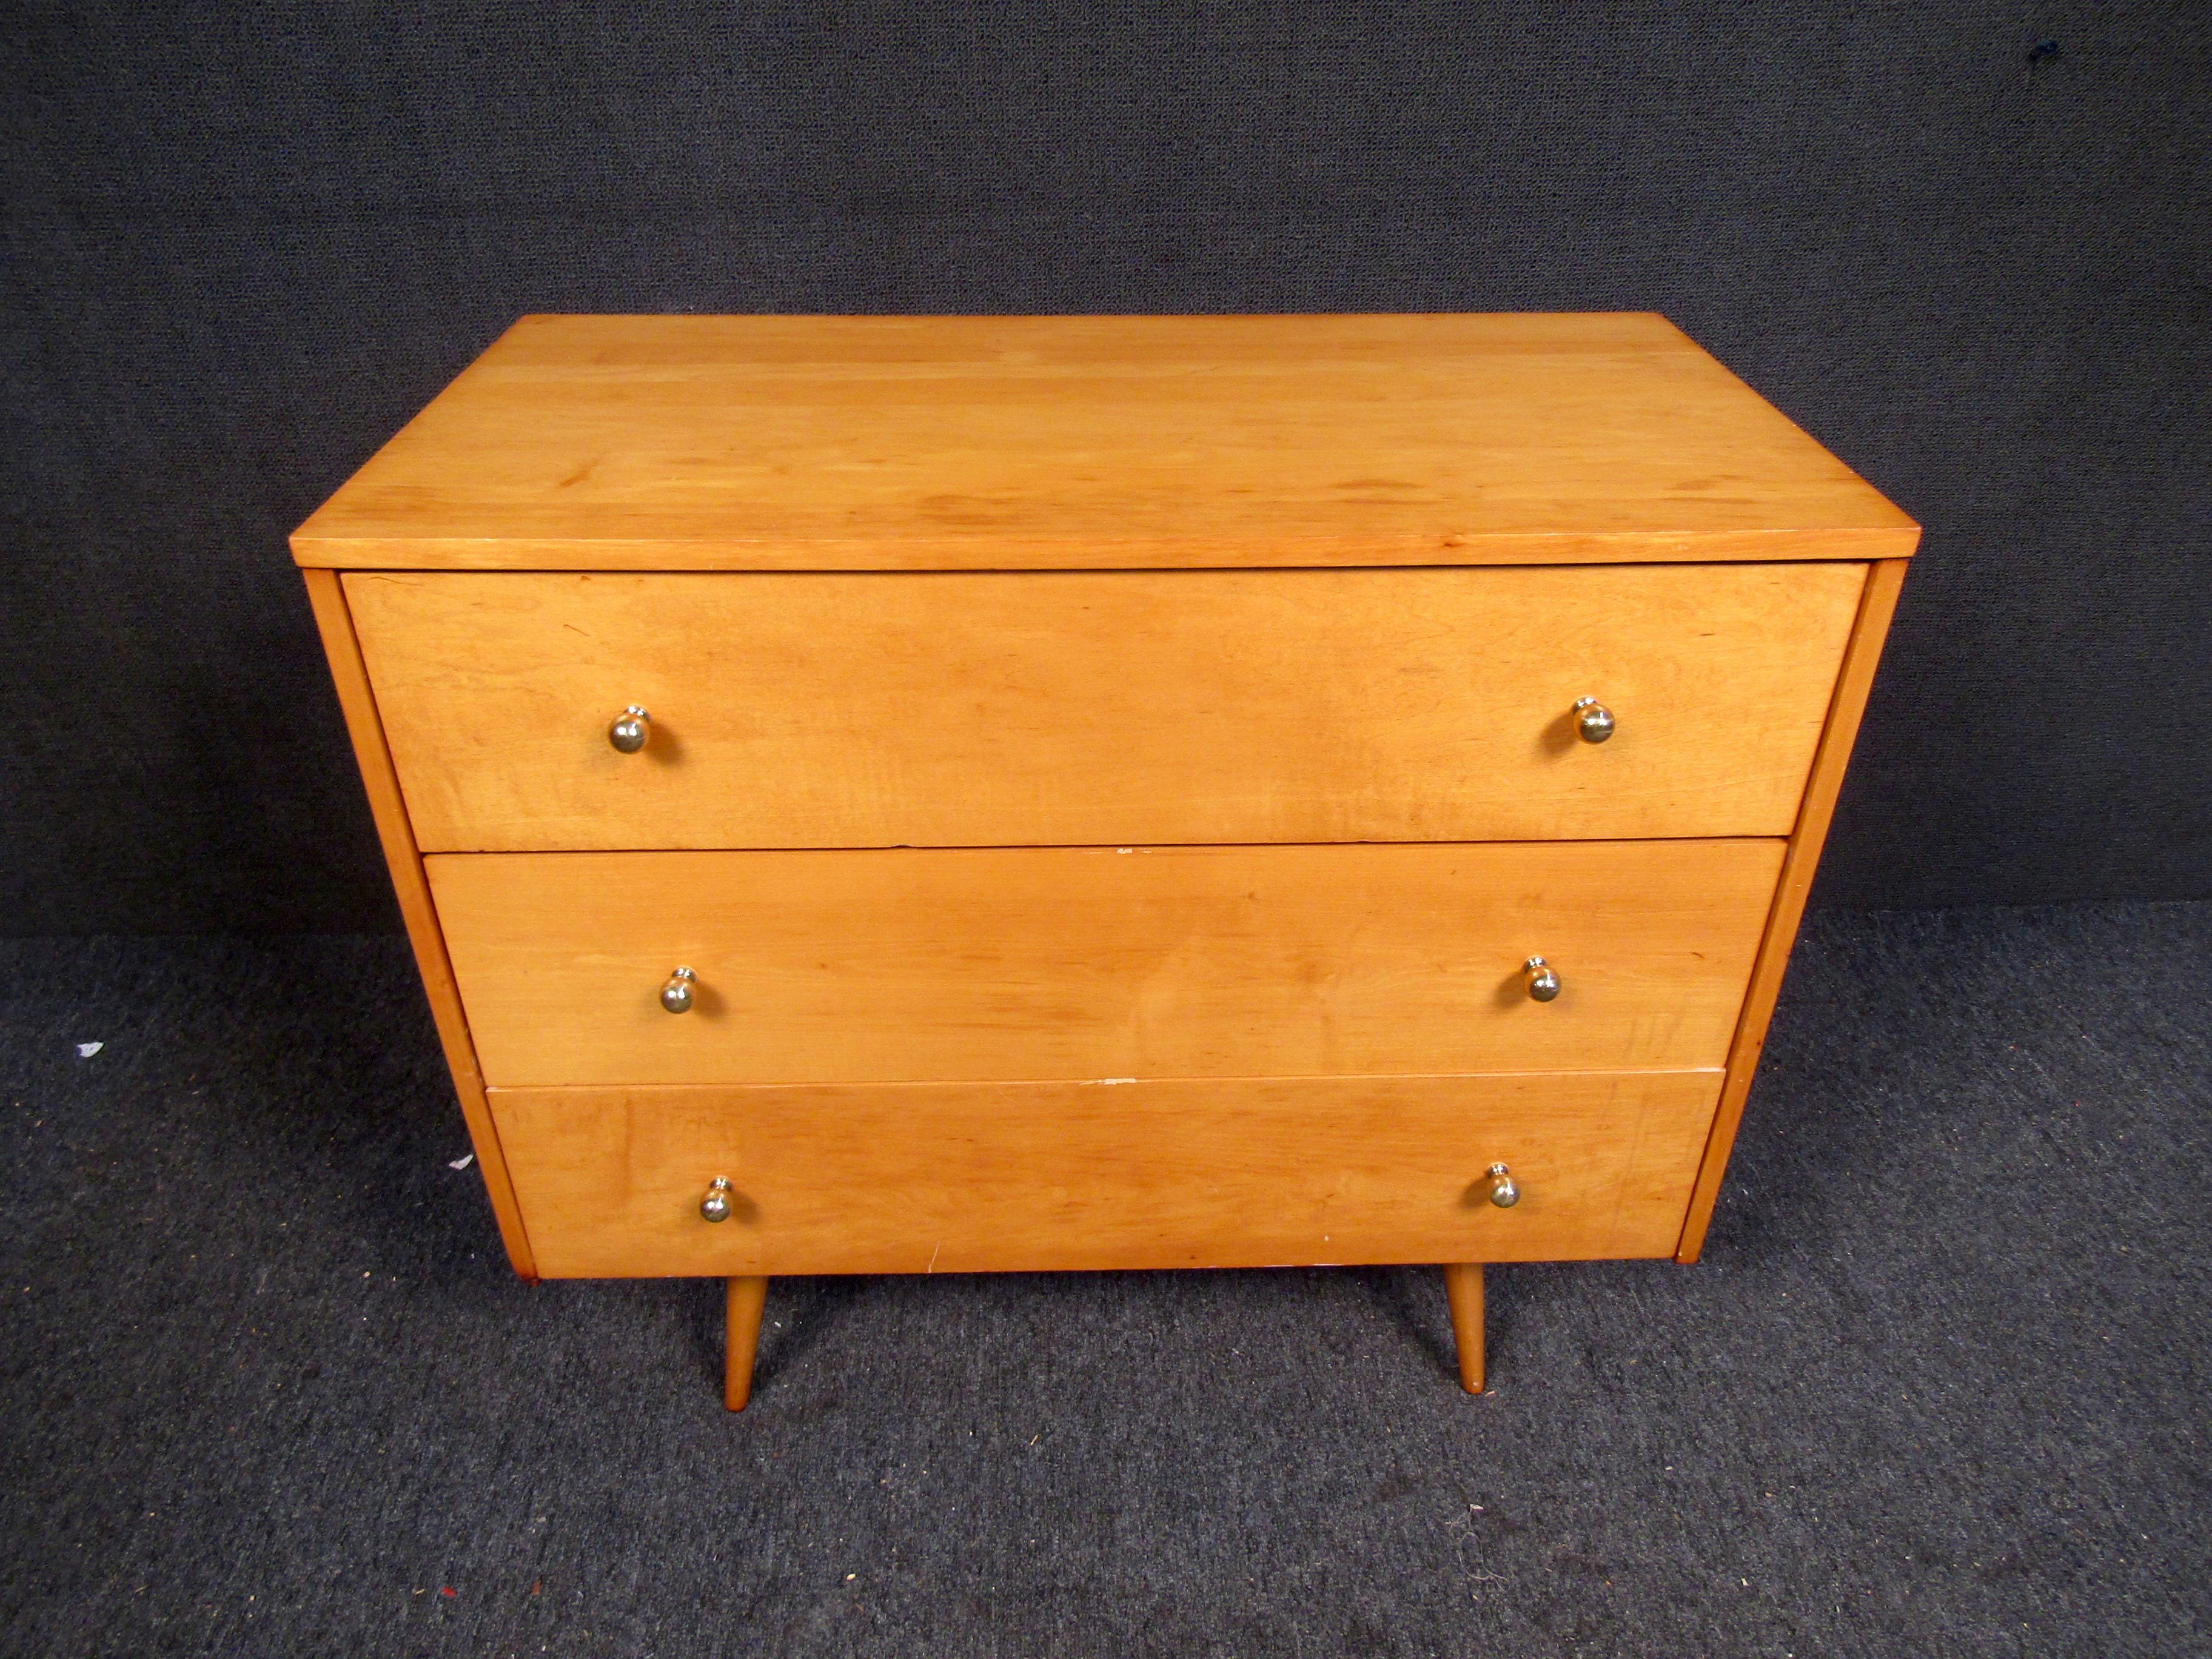 Handsome, classic Mid-Century Modern three drawer dresser, chest by Paul McCobb for his Pre-Planner Group Winchendon modern line made by Winchendon Furniture in the 1950s. Features three spacious, deep drawers, all resting on beautiful tapered feet.